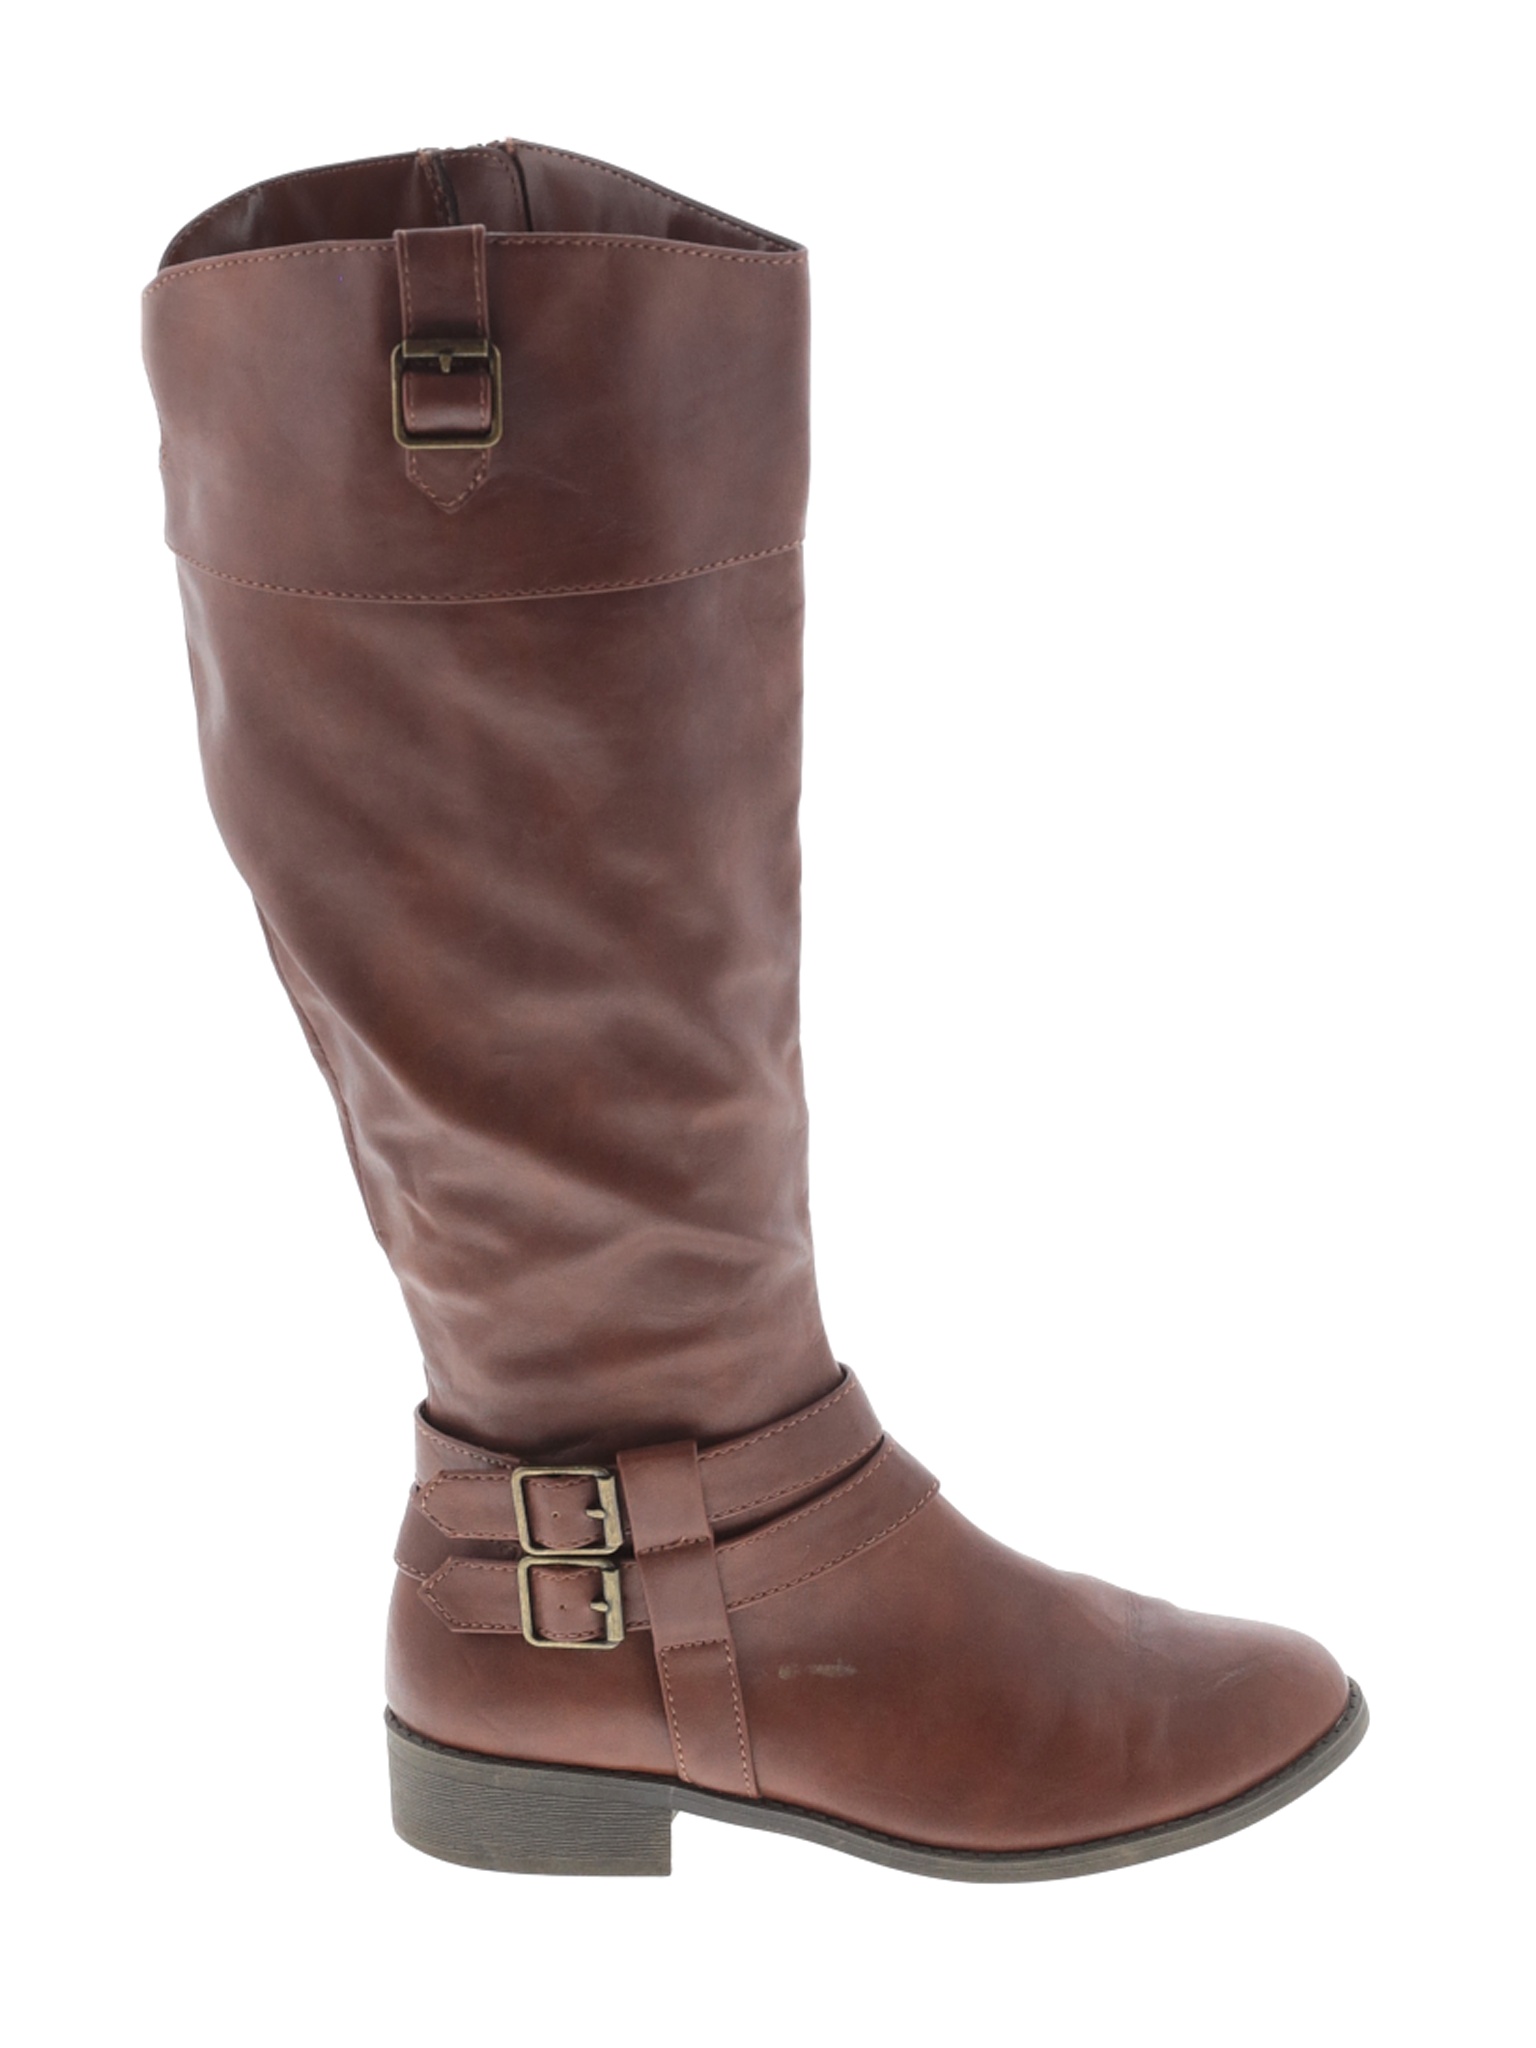 American Eagle Shoes Women Brown Boots US 7 | eBay